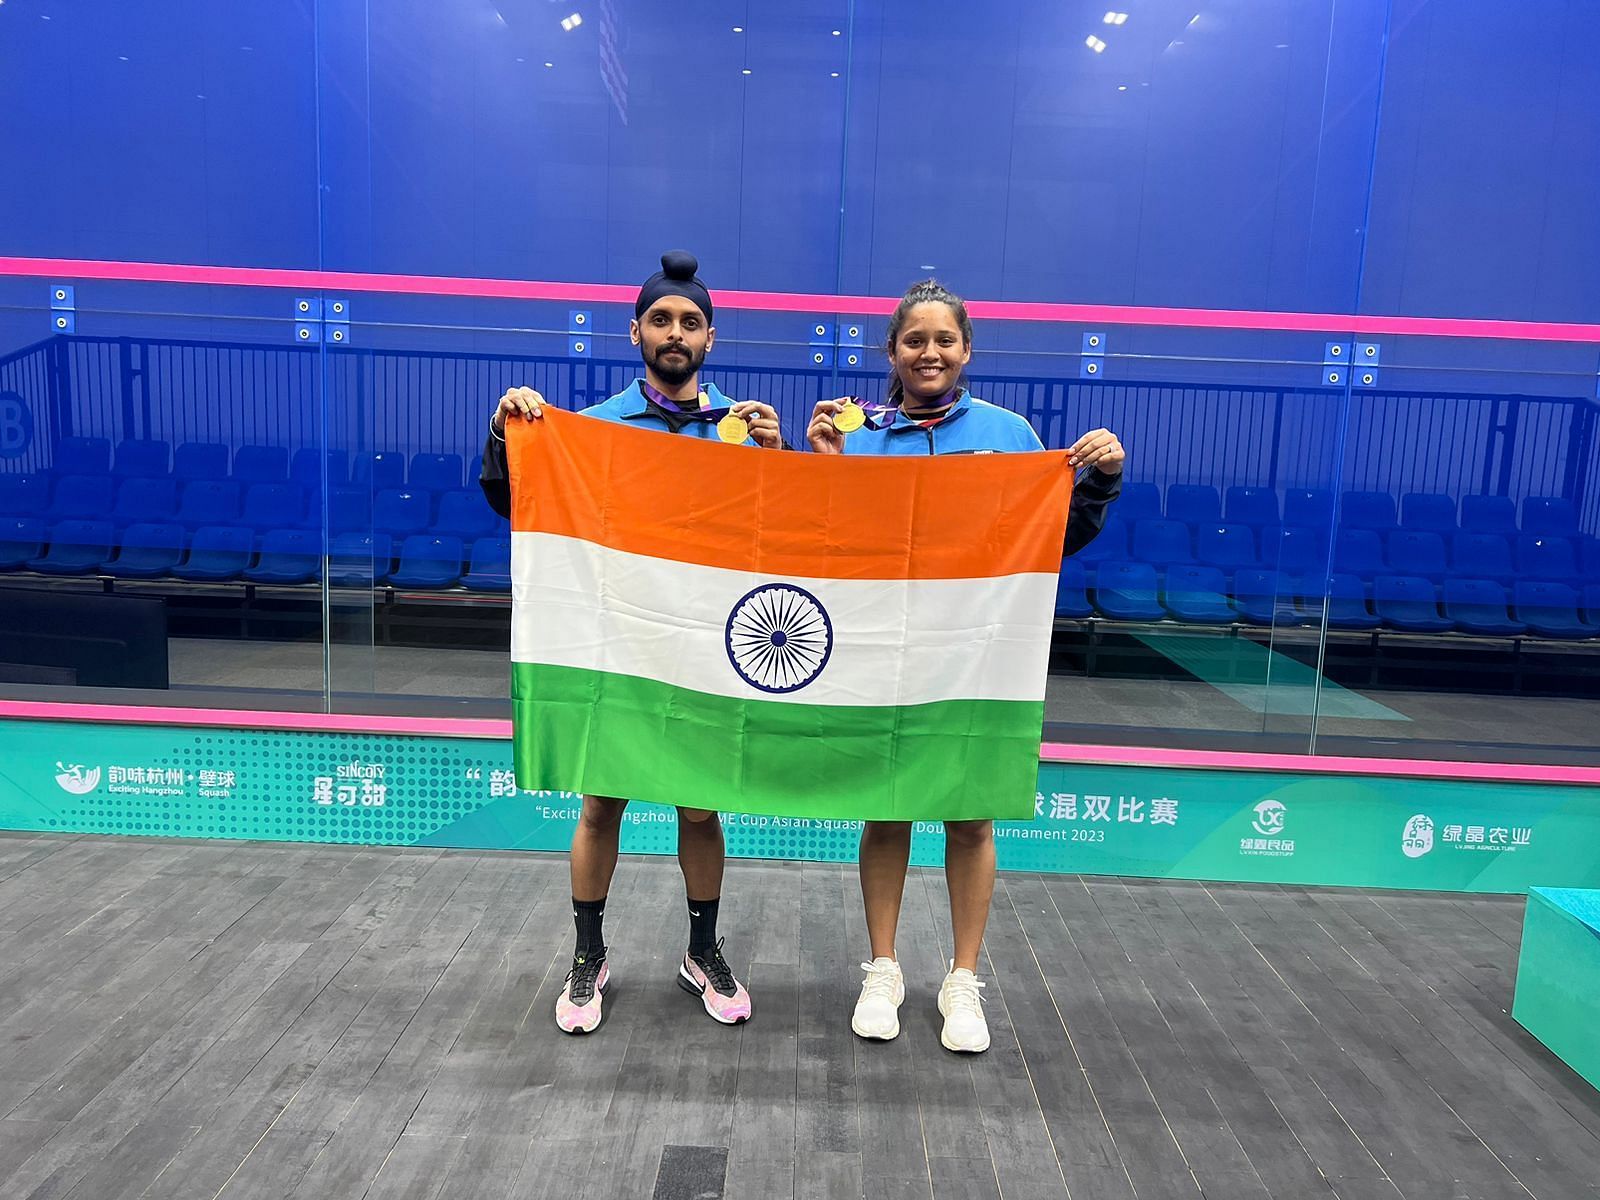 India won 5 squash medals in Asian Games 2023: Twitter photo